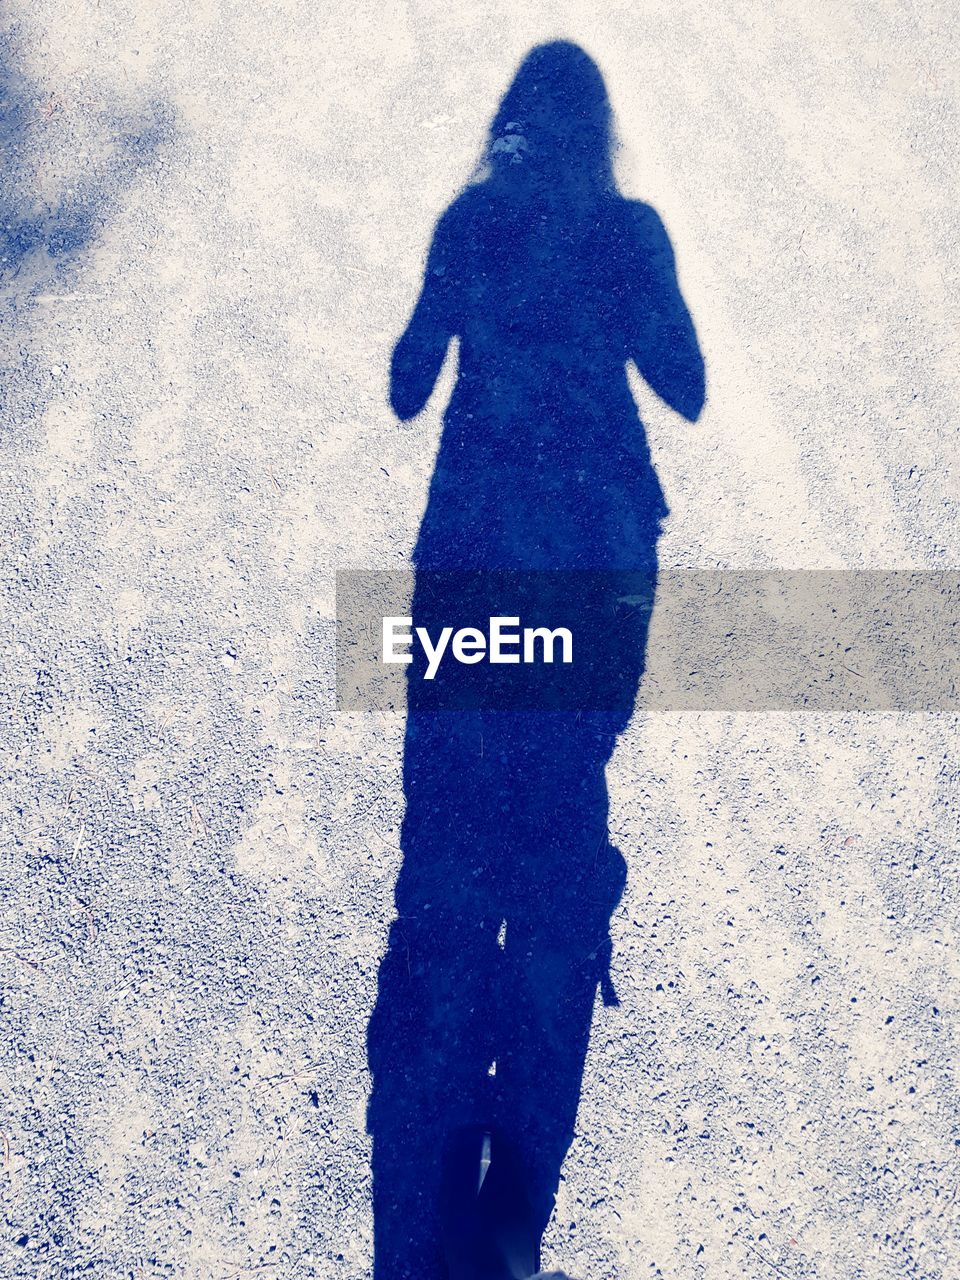 HIGH ANGLE VIEW OF PERSON SHADOW ON STREET IN SNOW